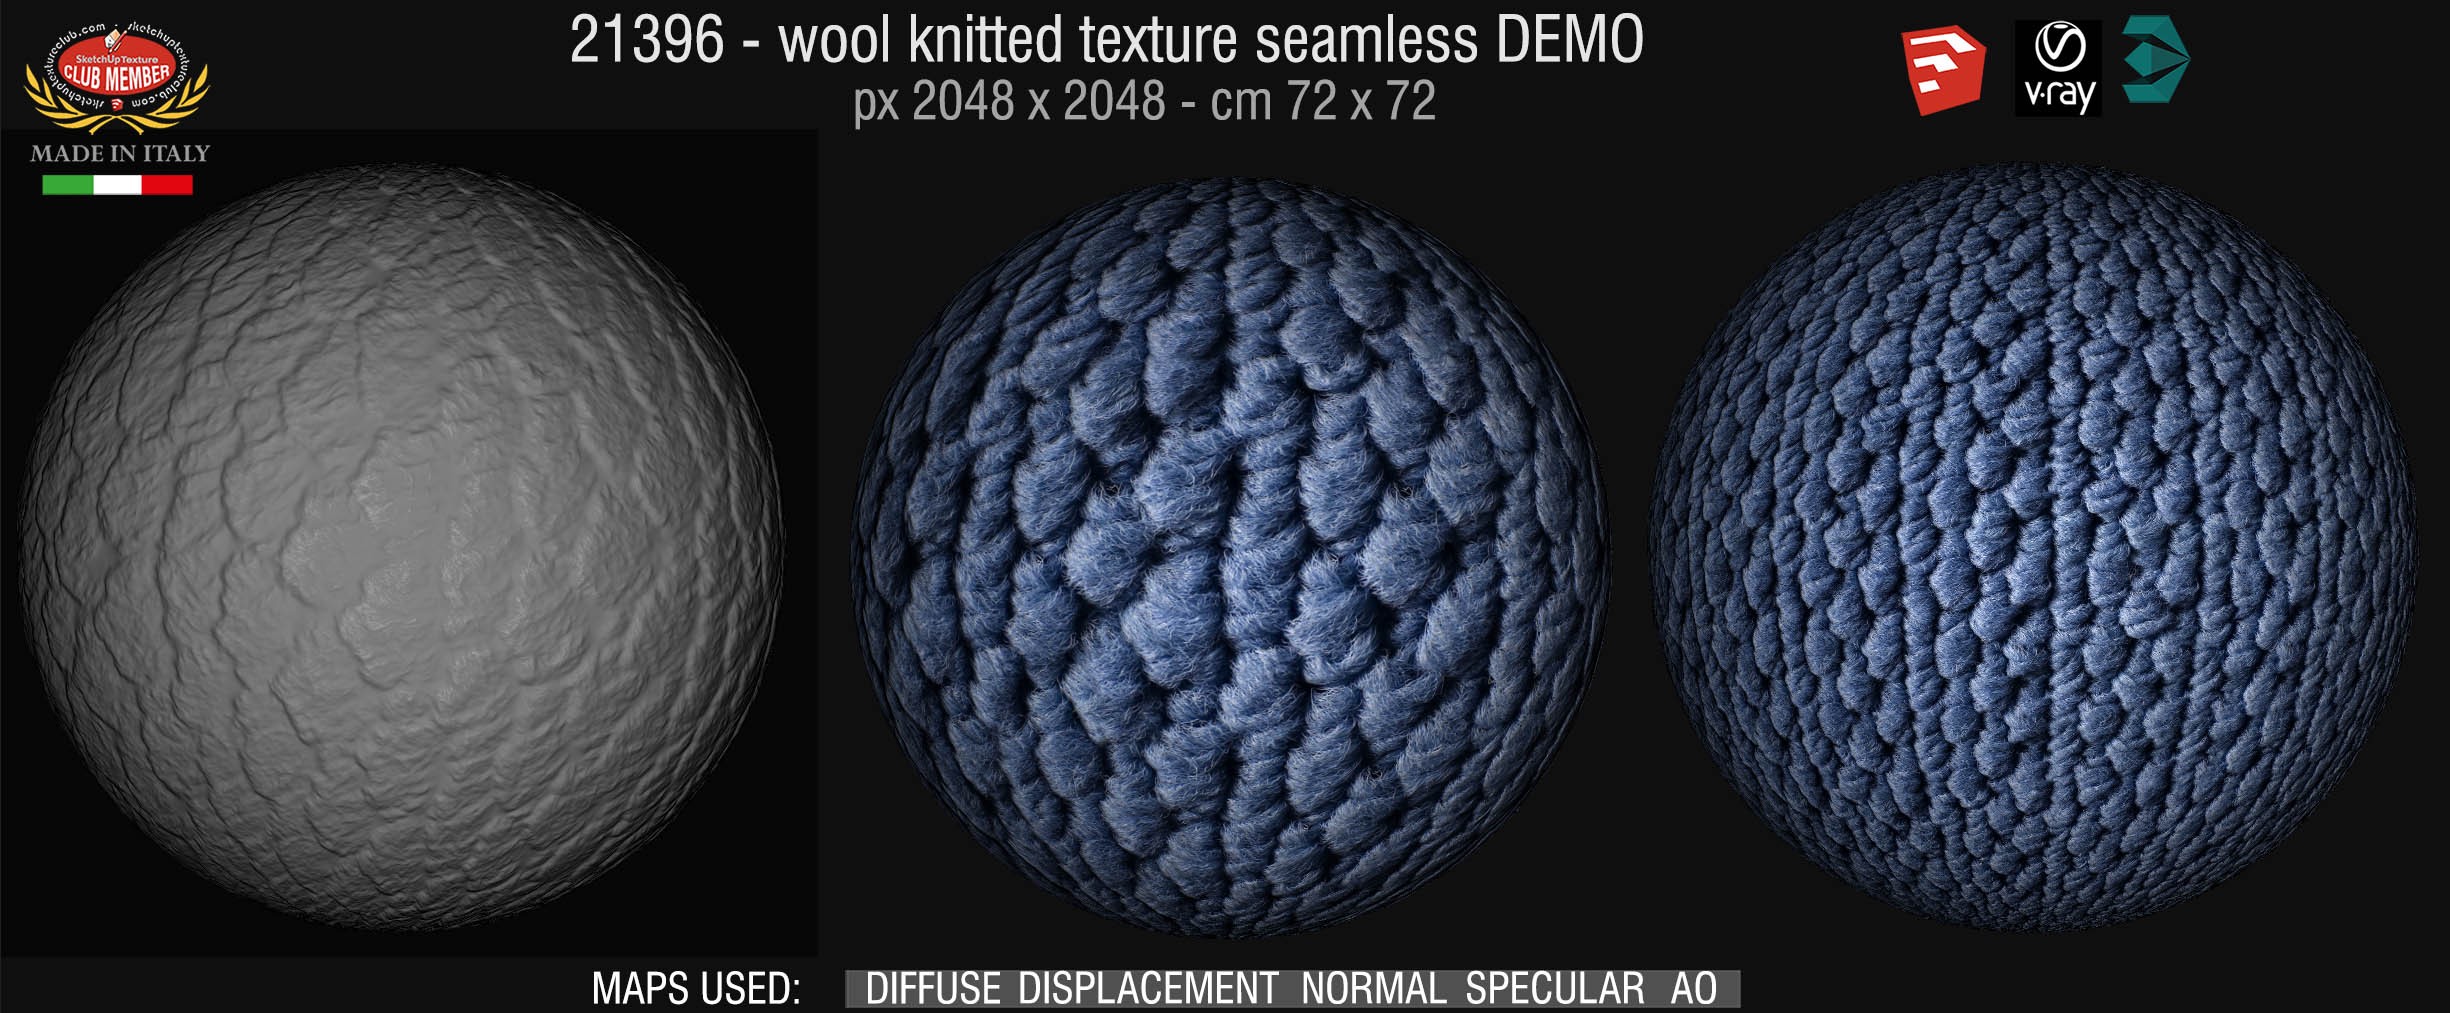 21396 wool knitted texture seamless + maps DEMO